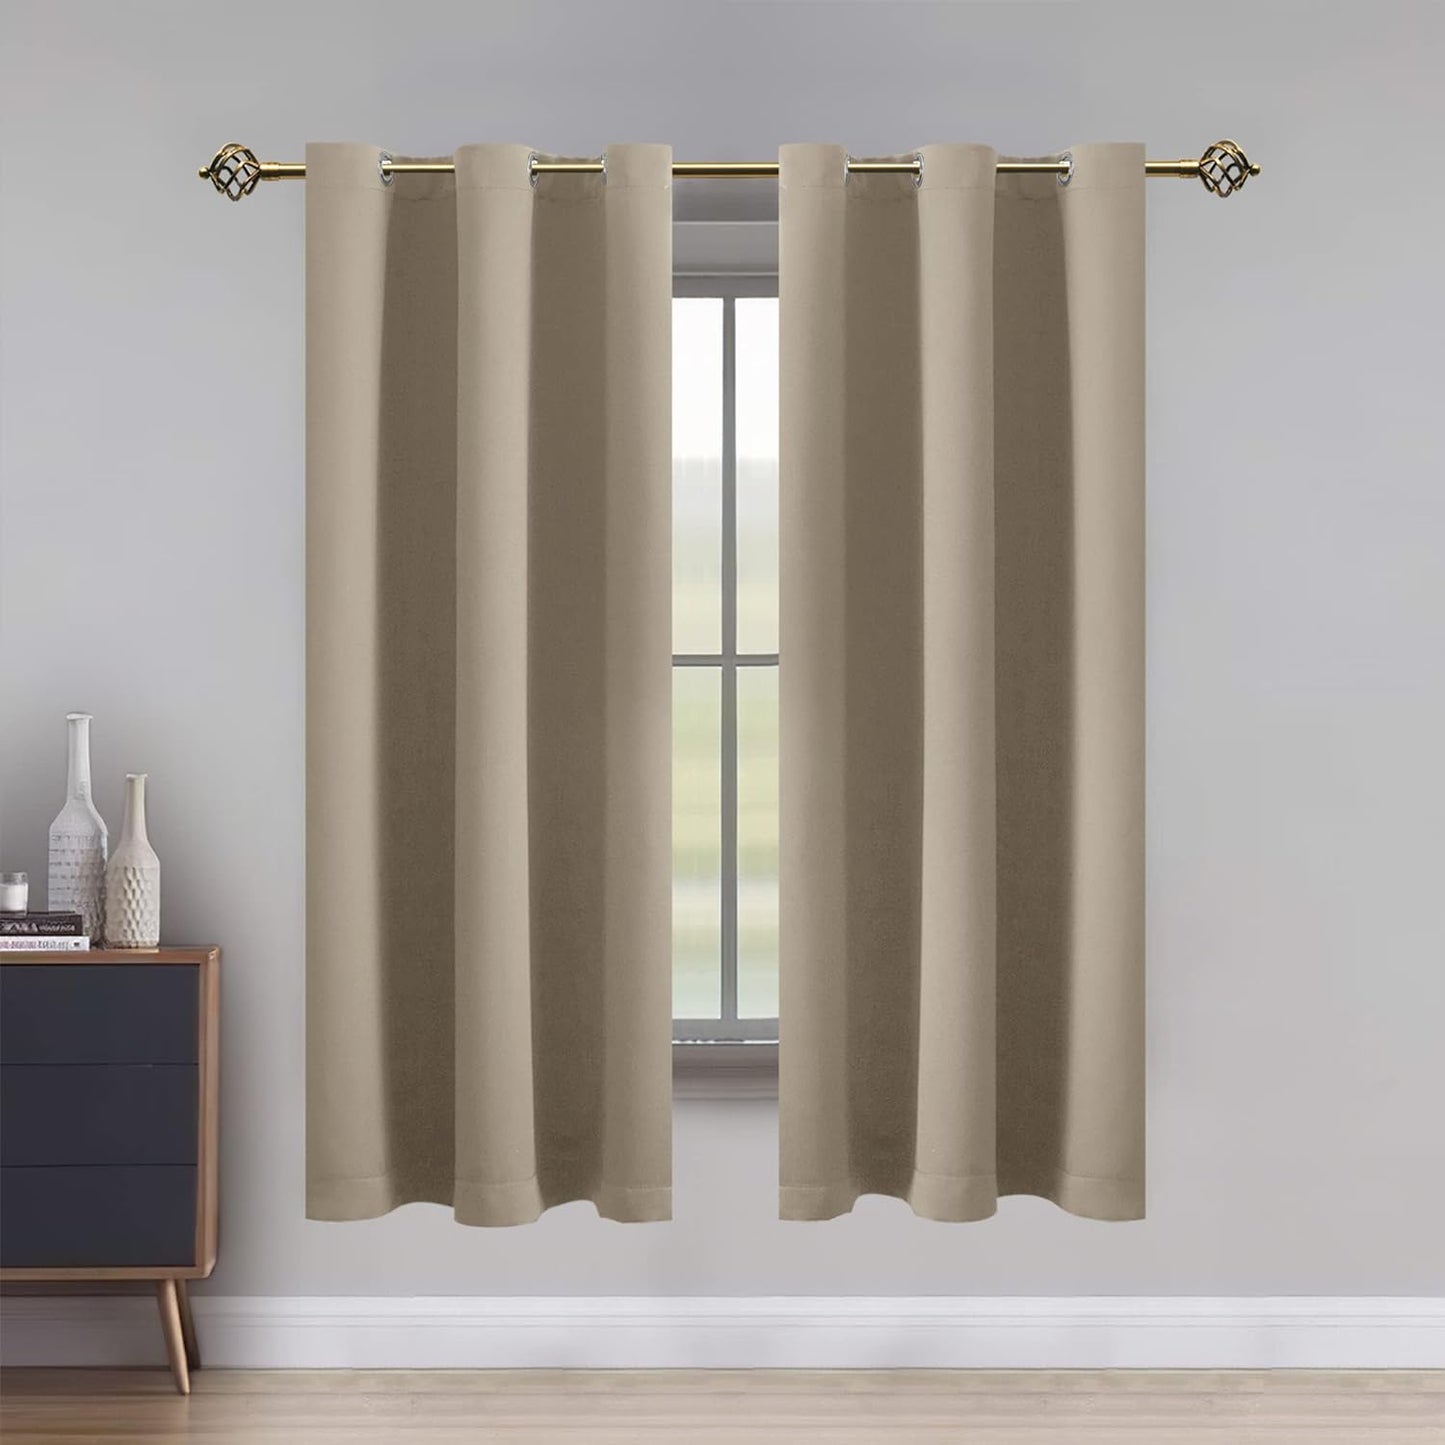 LUSHLEAF Blackout Curtains for Bedroom, Solid Thermal Insulated with Grommet Noise Reduction Window Drapes, Room Darkening Curtains for Living Room, 2 Panels, 52 X 63 Inch Grey  SHEEROOM Light Beige 42 X 84 Inch 